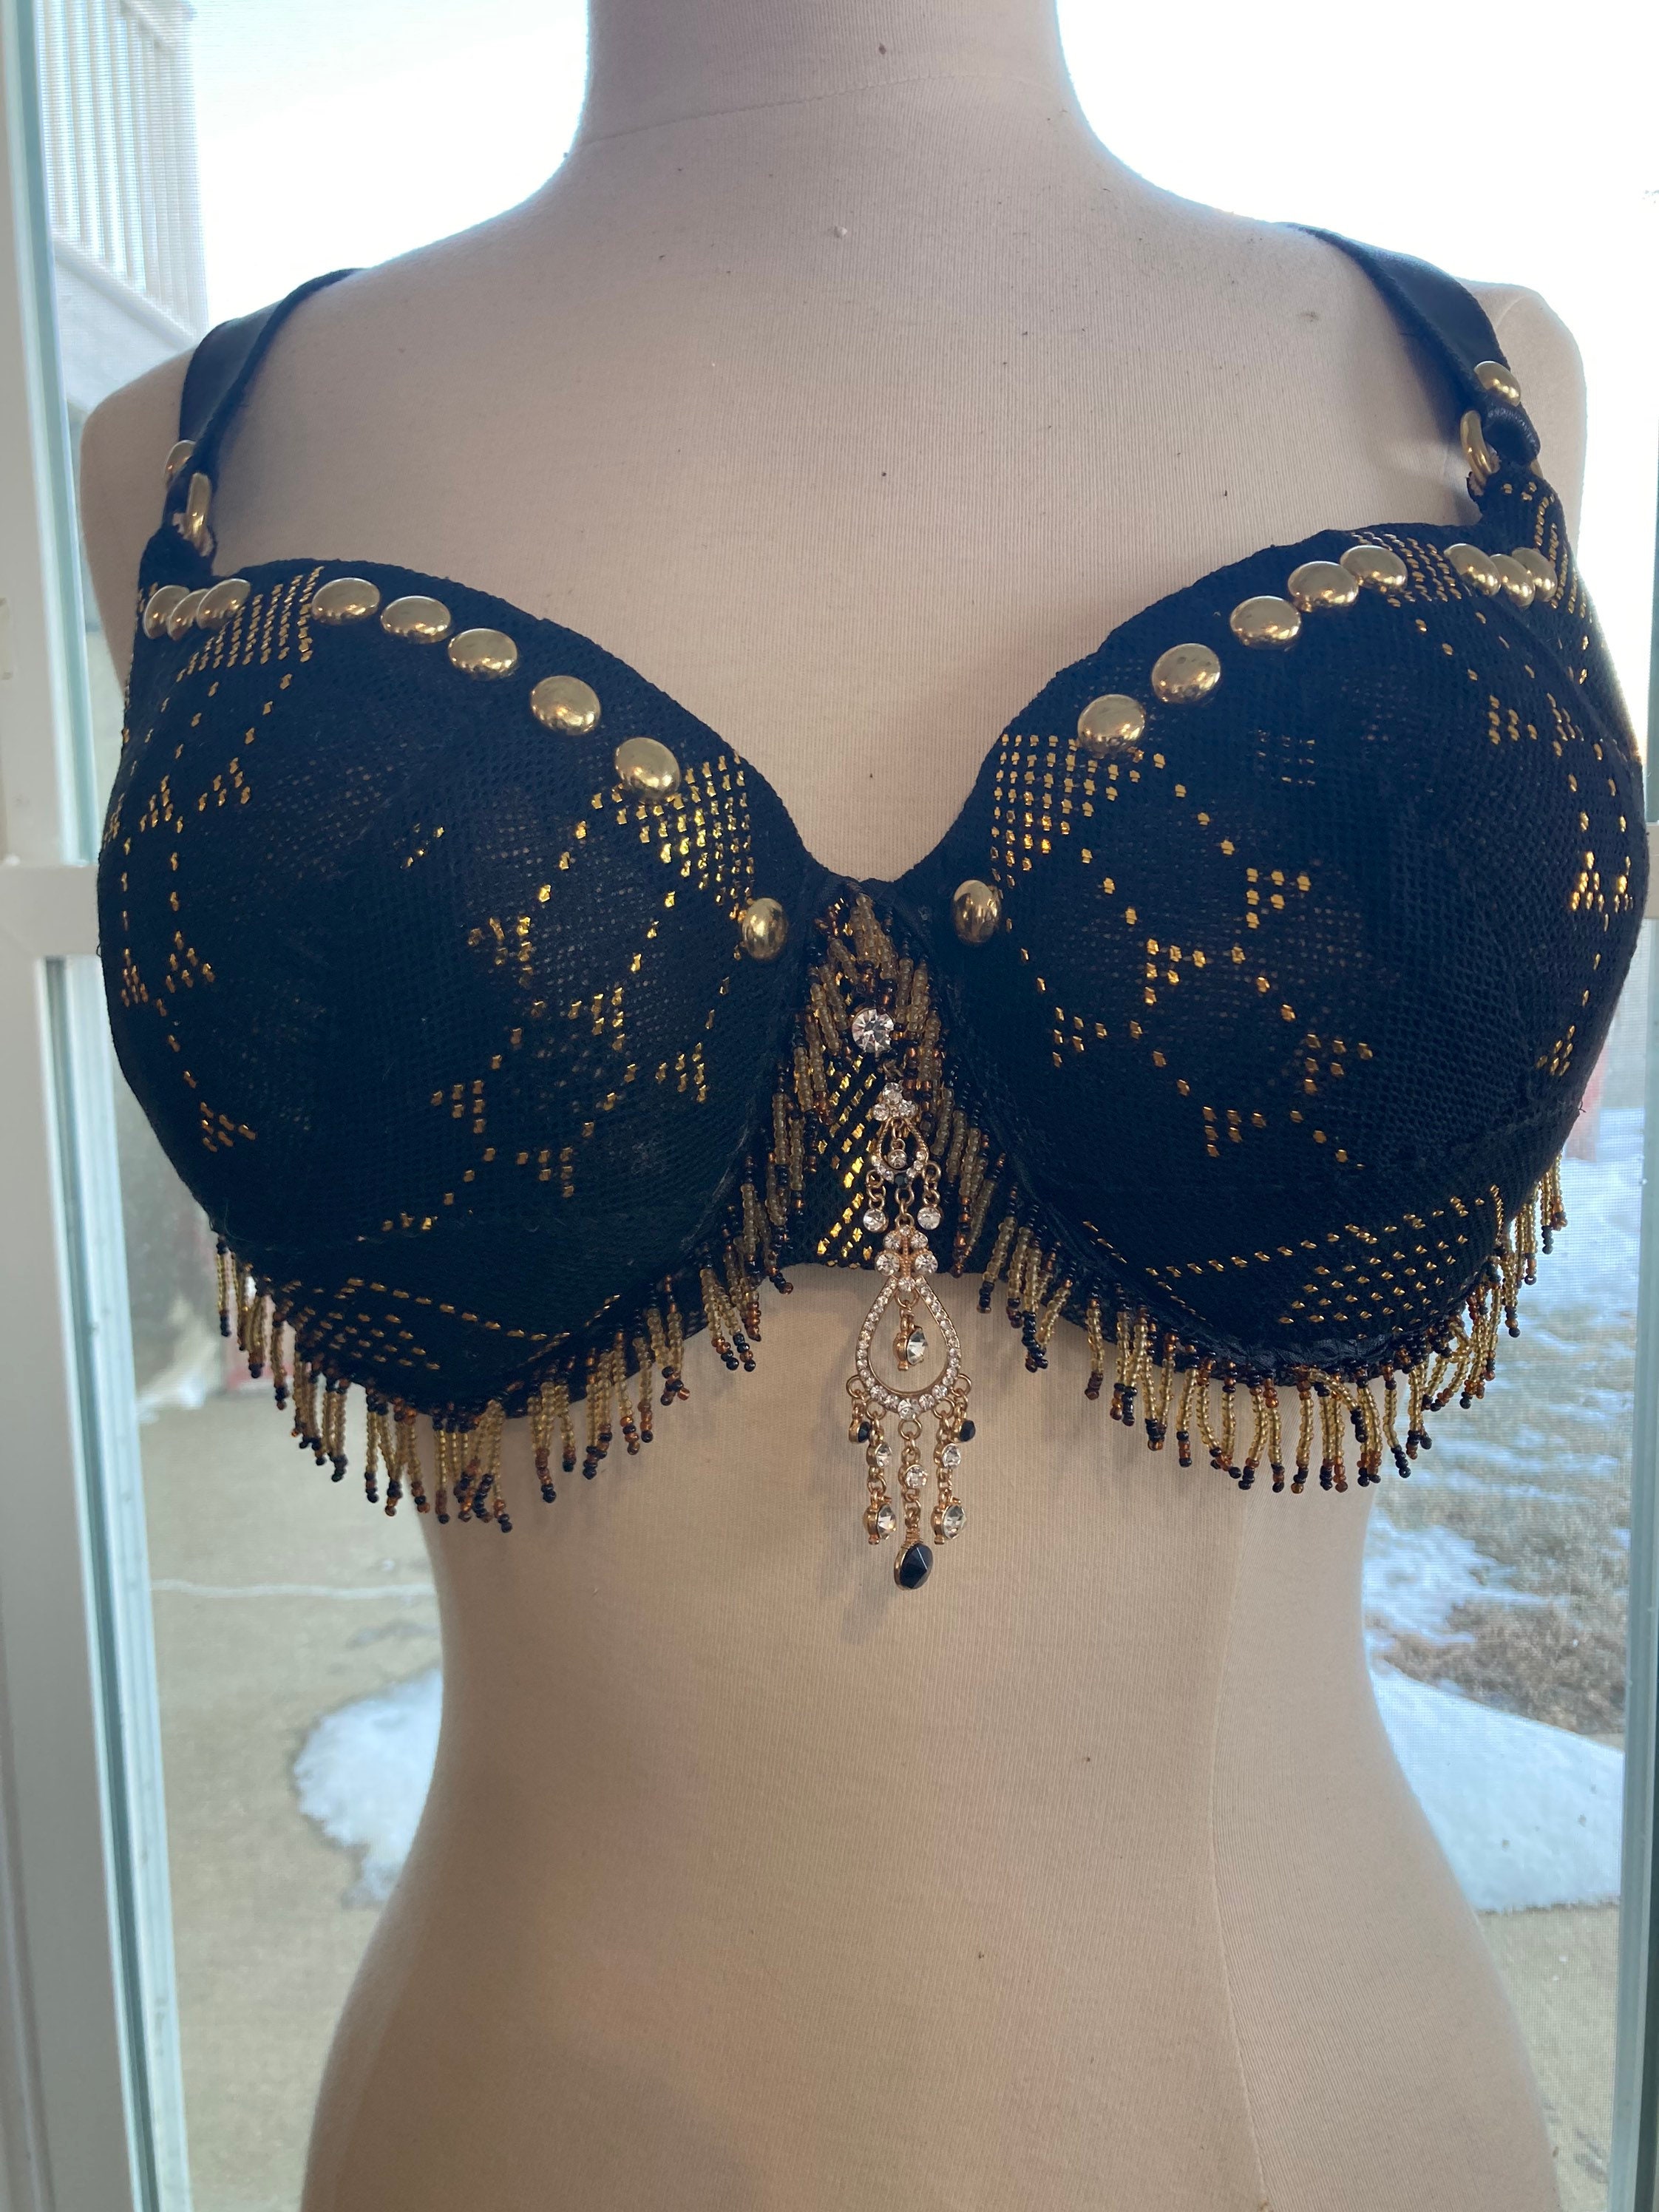 Tribal Fusion Belly Dance Bra With Silver Coins and Afghani Jewelry Accents  shaped Hard Cup -  New Zealand